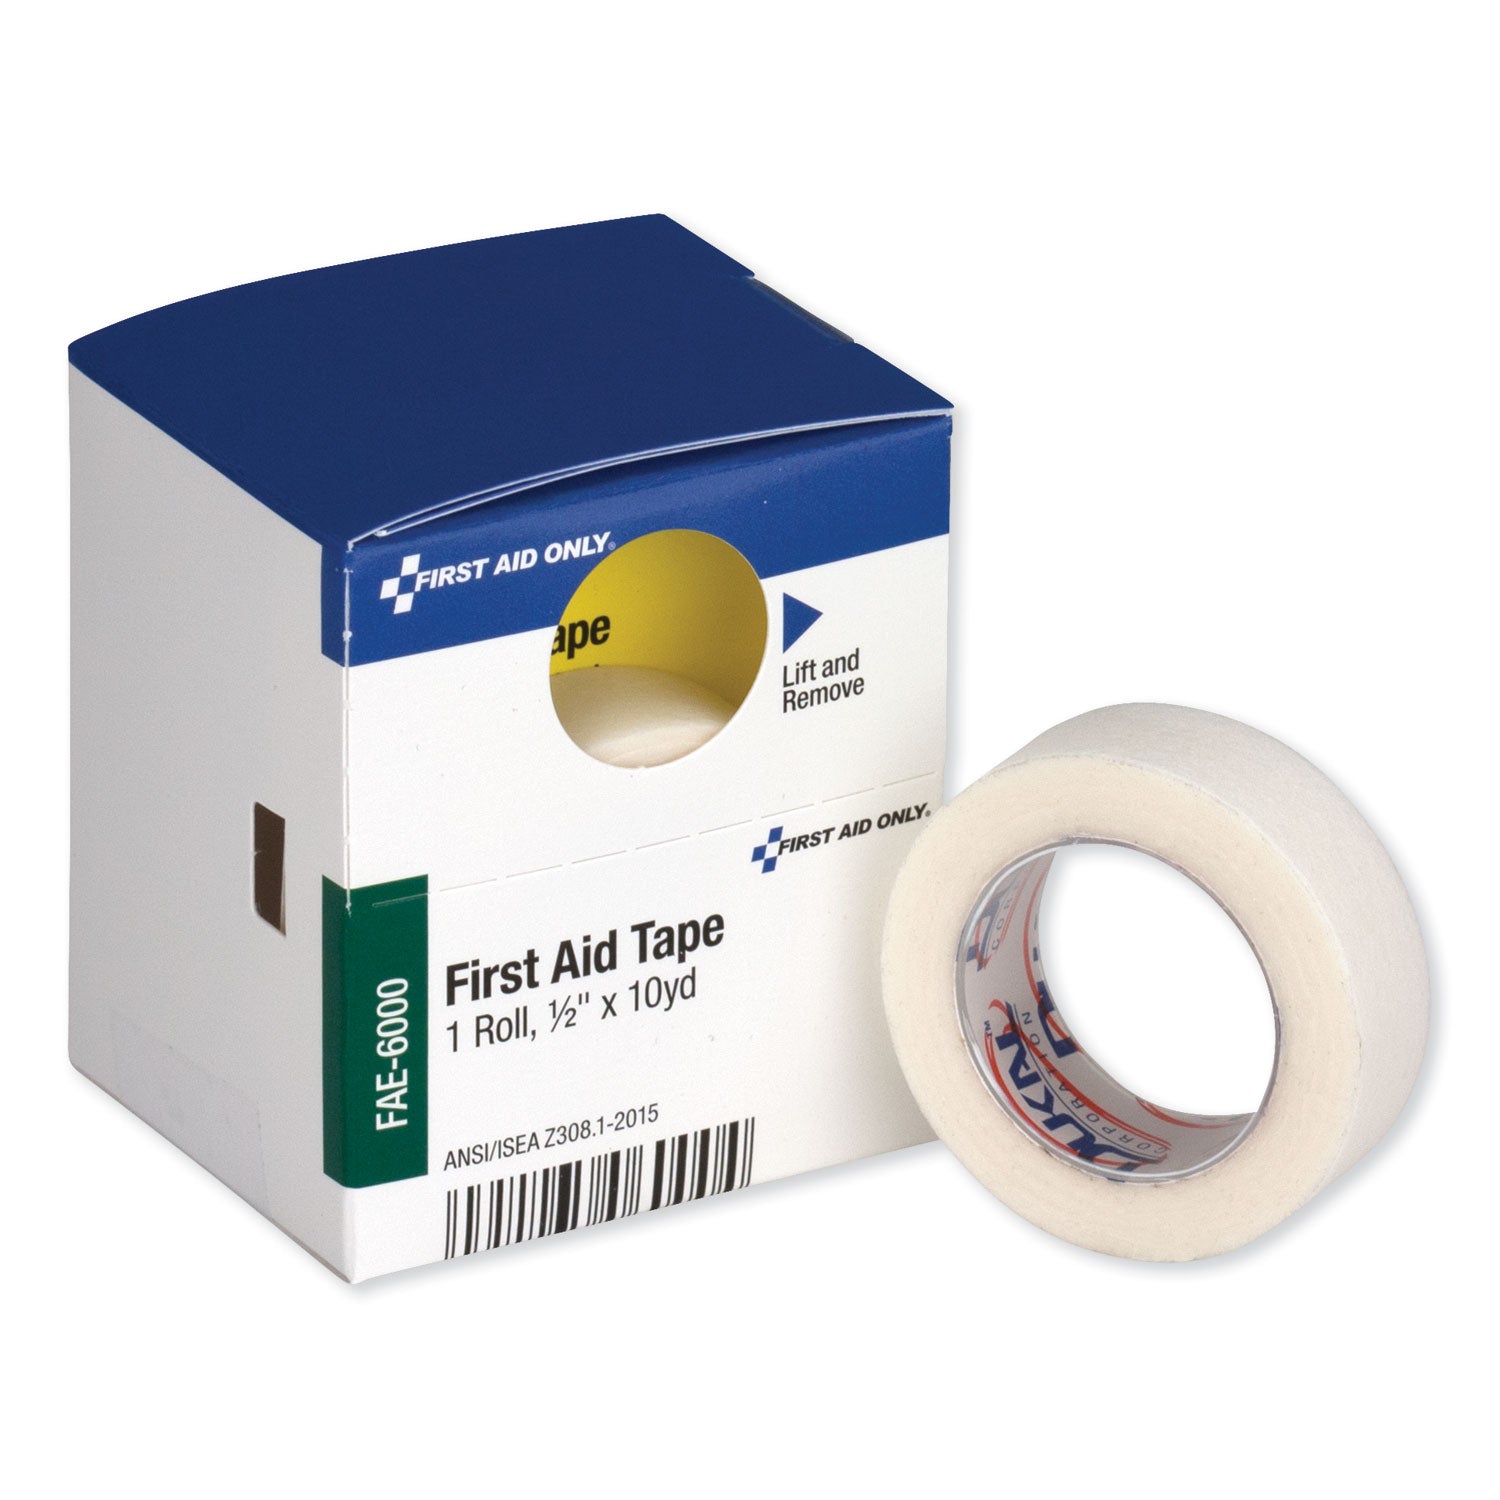 First Aid Tape, Acrylic, 0.5" x 10 yds, White - 